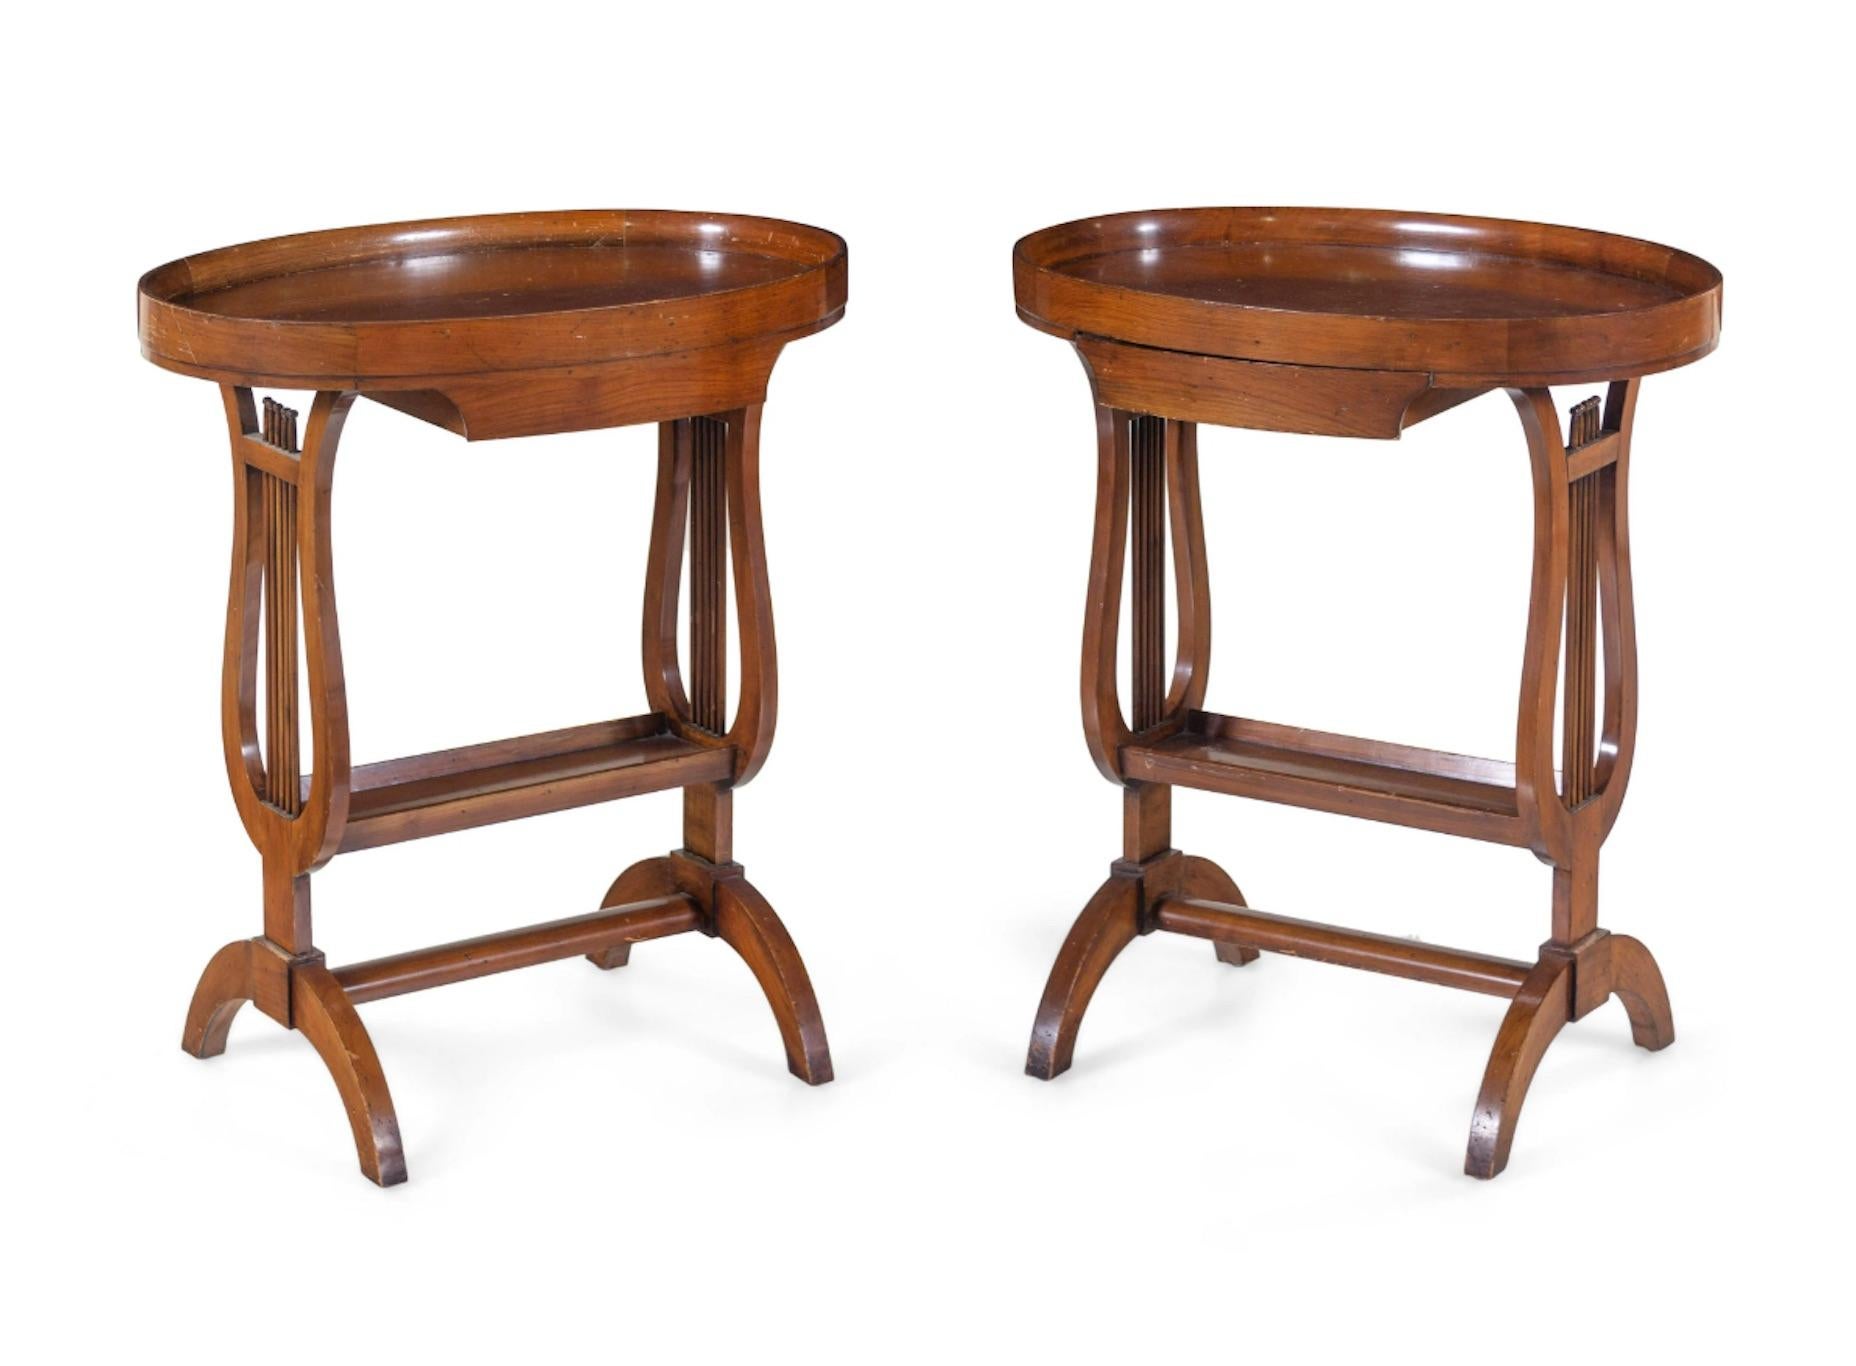 Italian Pair of European Classical Style Cherry Work Tables, Late 19th Century